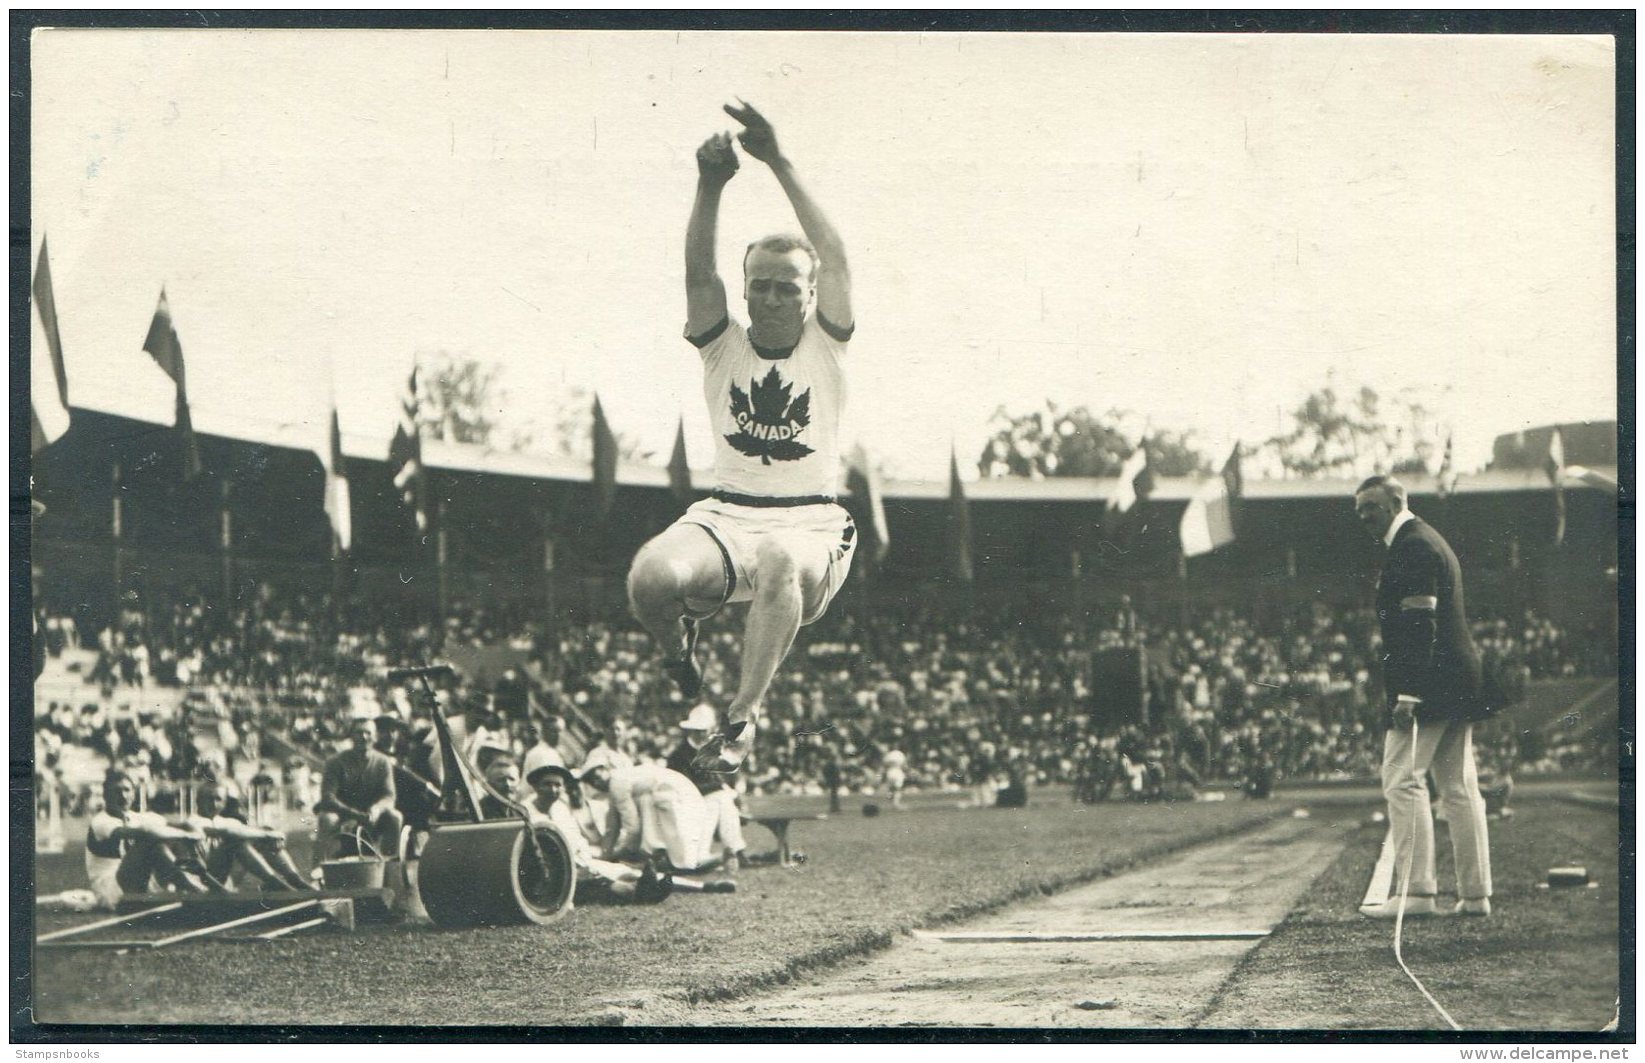 1912 Sweden Stockholm Olympics Official RP Postcard 183. C.D.Bricker, Canada,Running Long Jump - Olympic Games